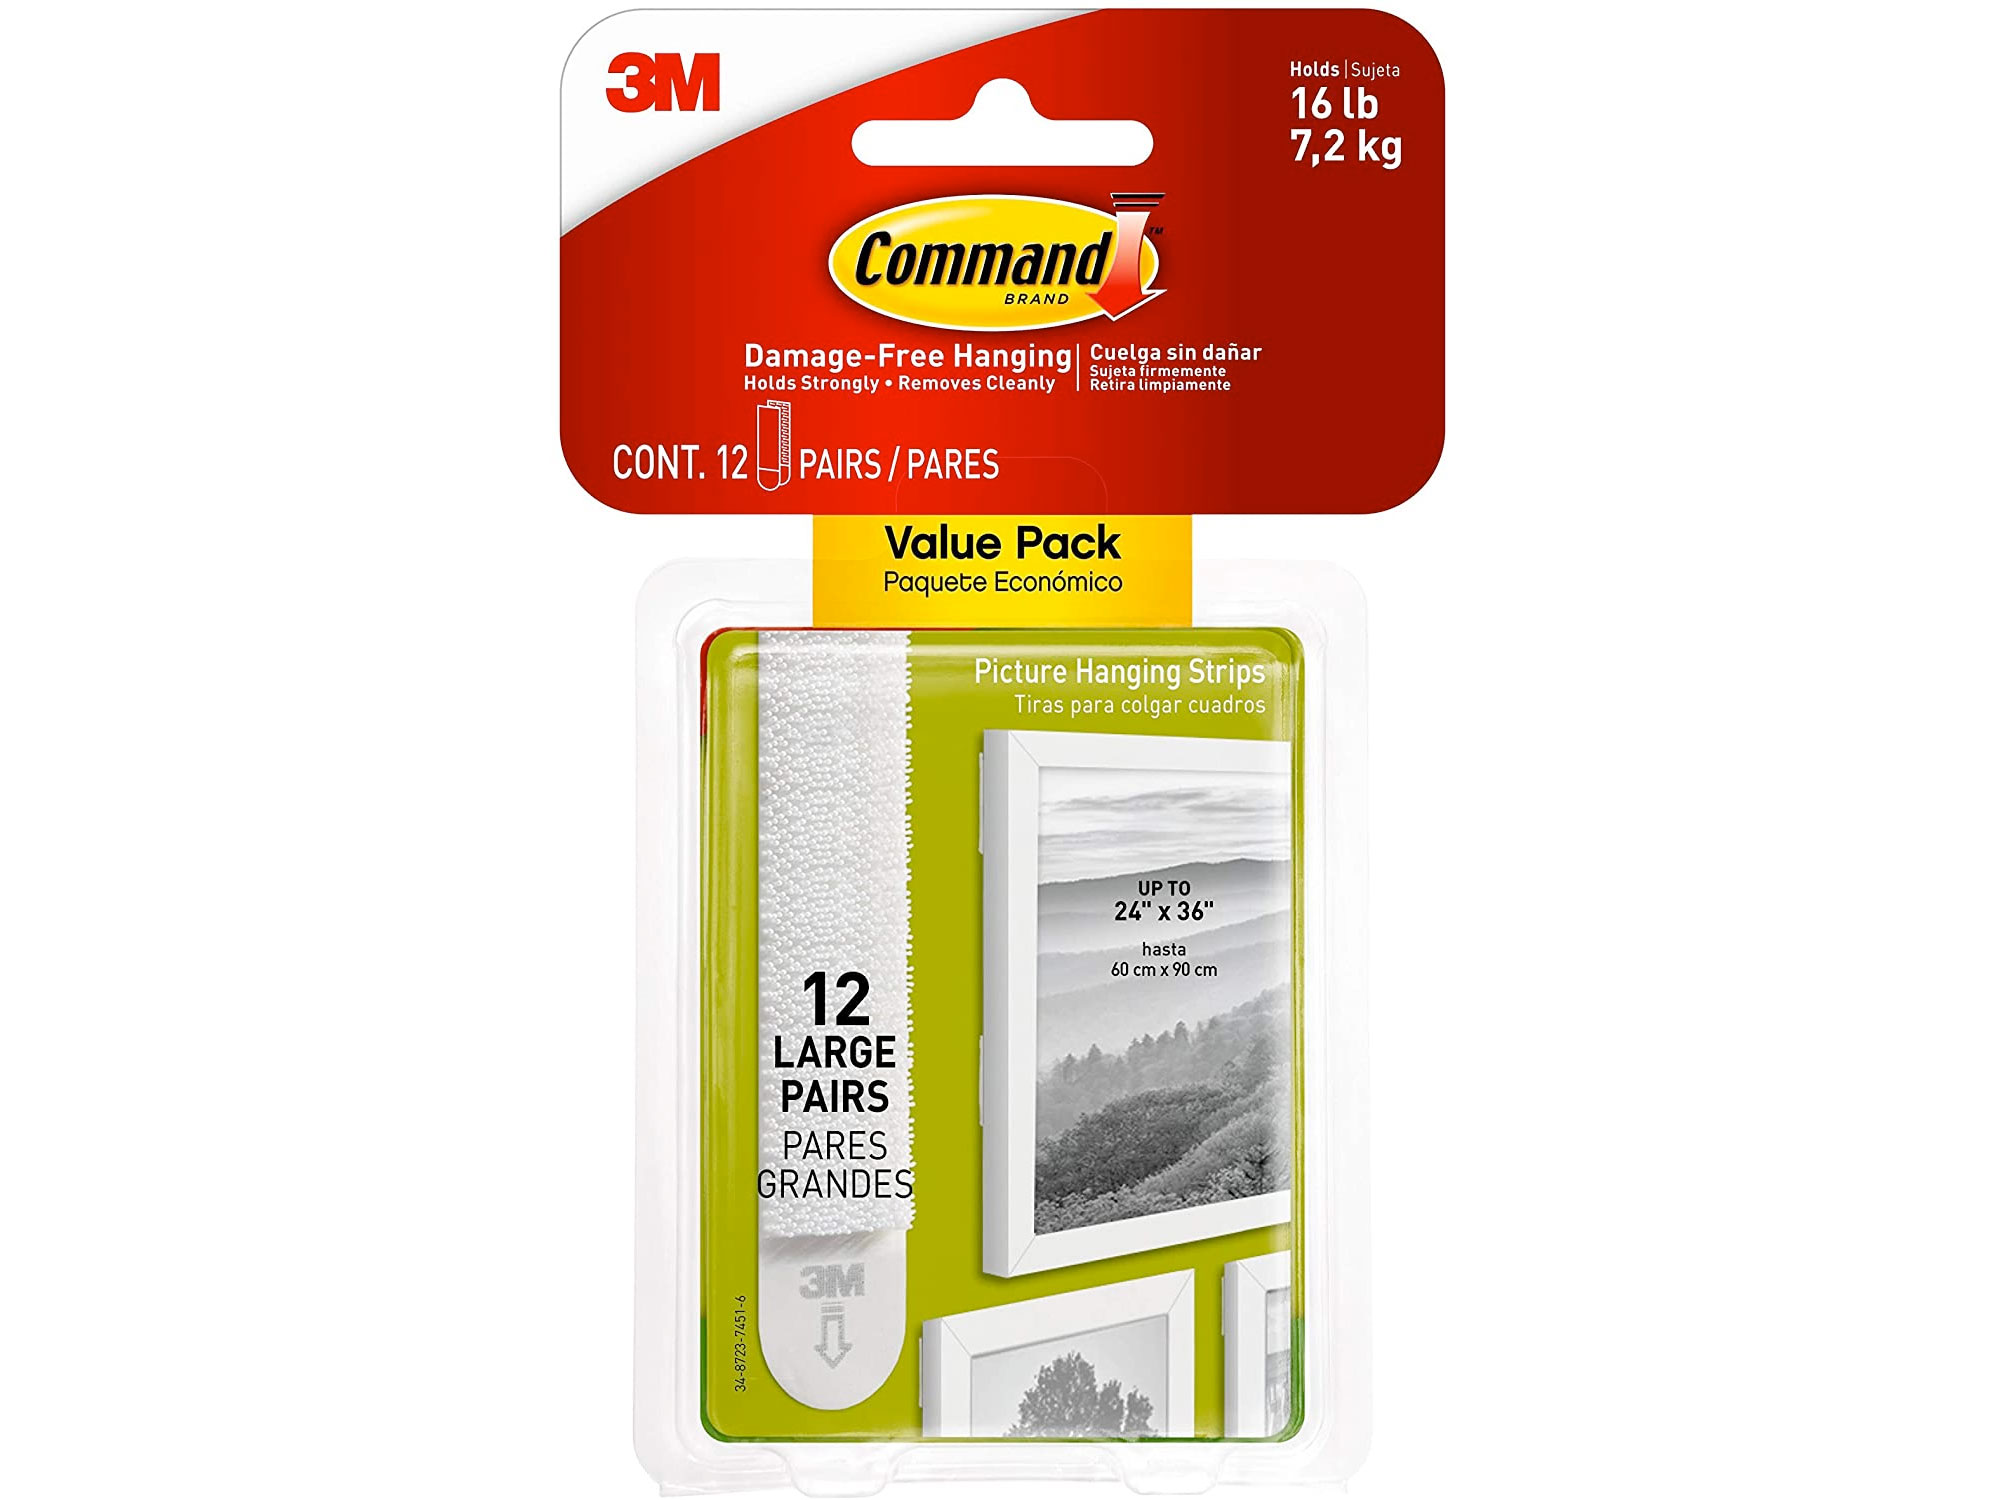 Amazon：3M Large Picture Hanging Strips(12 Pairs)只卖$10.97